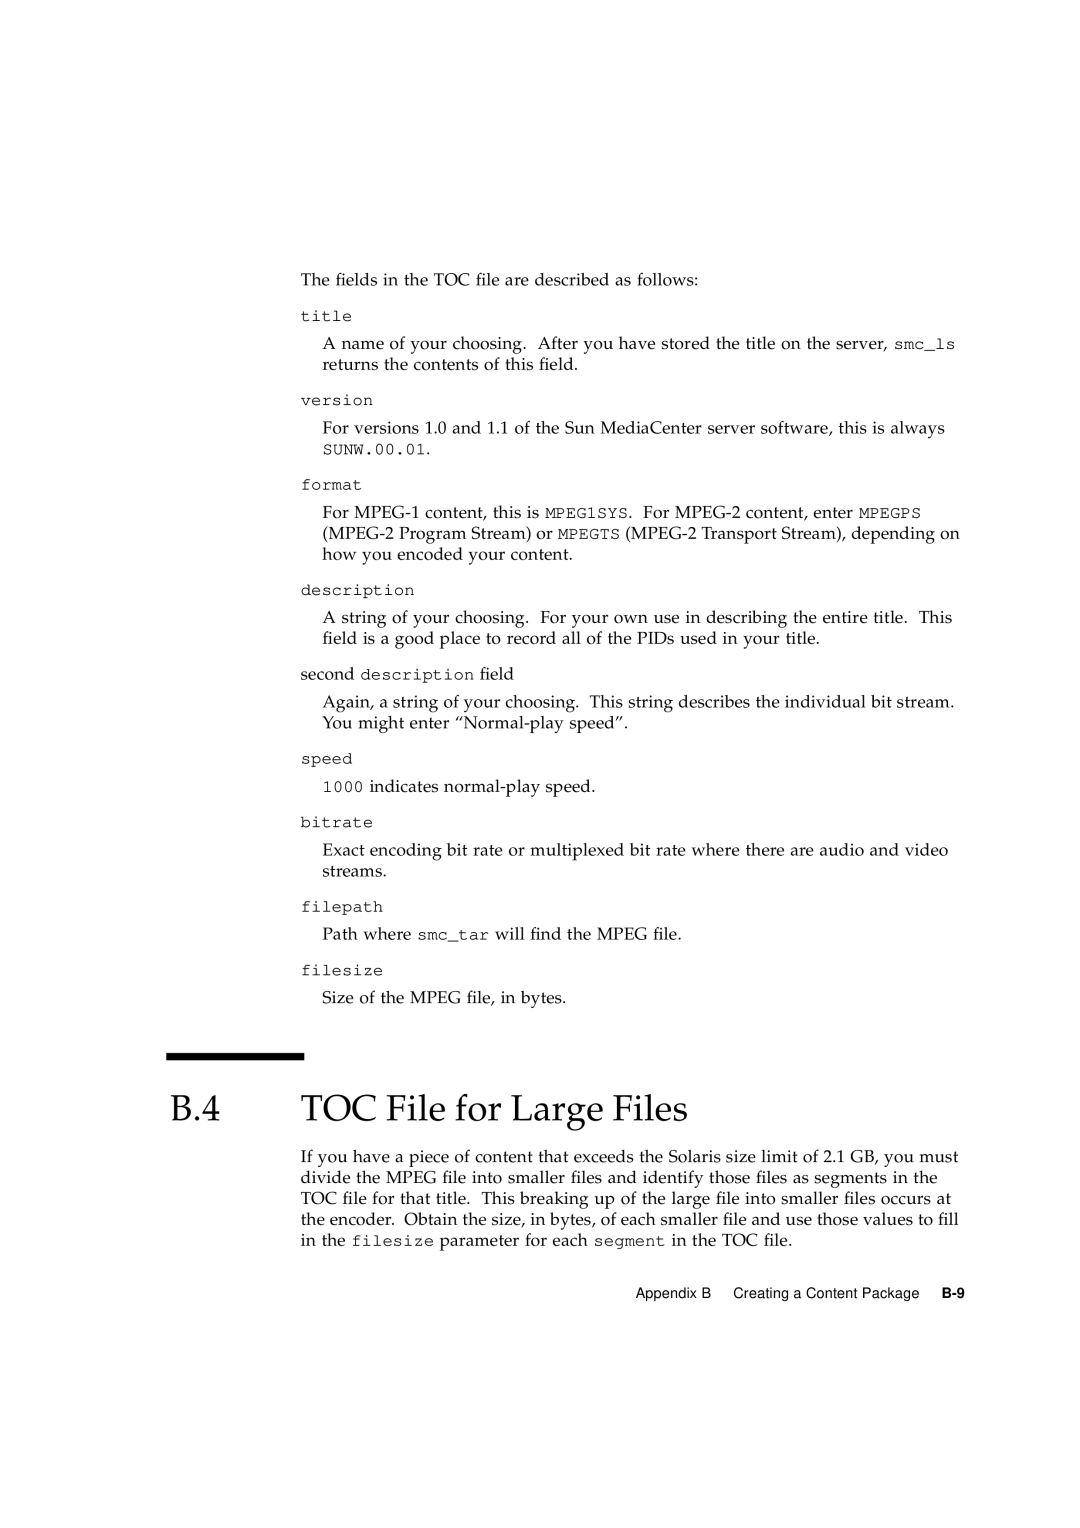 Sun Microsystems 2.1 B.4 TOC File for Large Files, title, version, format, second description ﬁeld, speed, bitrate 